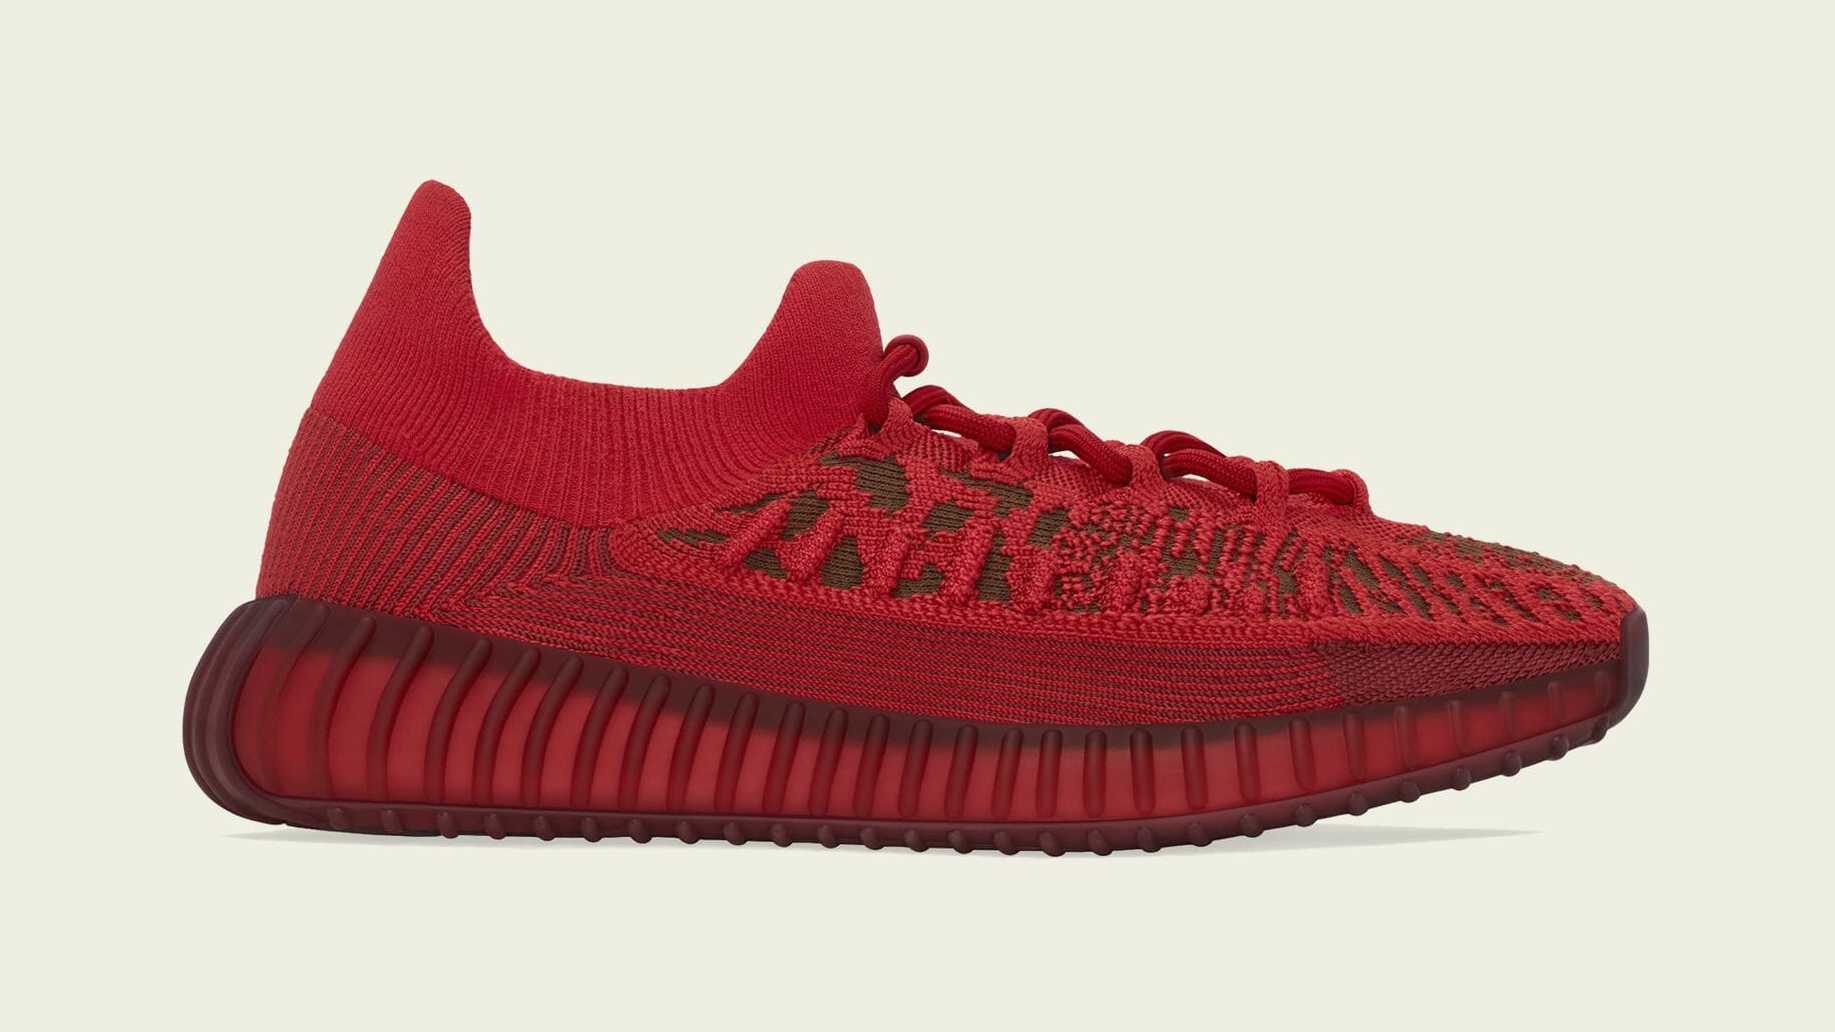 Adidas Yeezy Boost 350 V2 CMPCT 'Slate Red' GW6945 Lateral